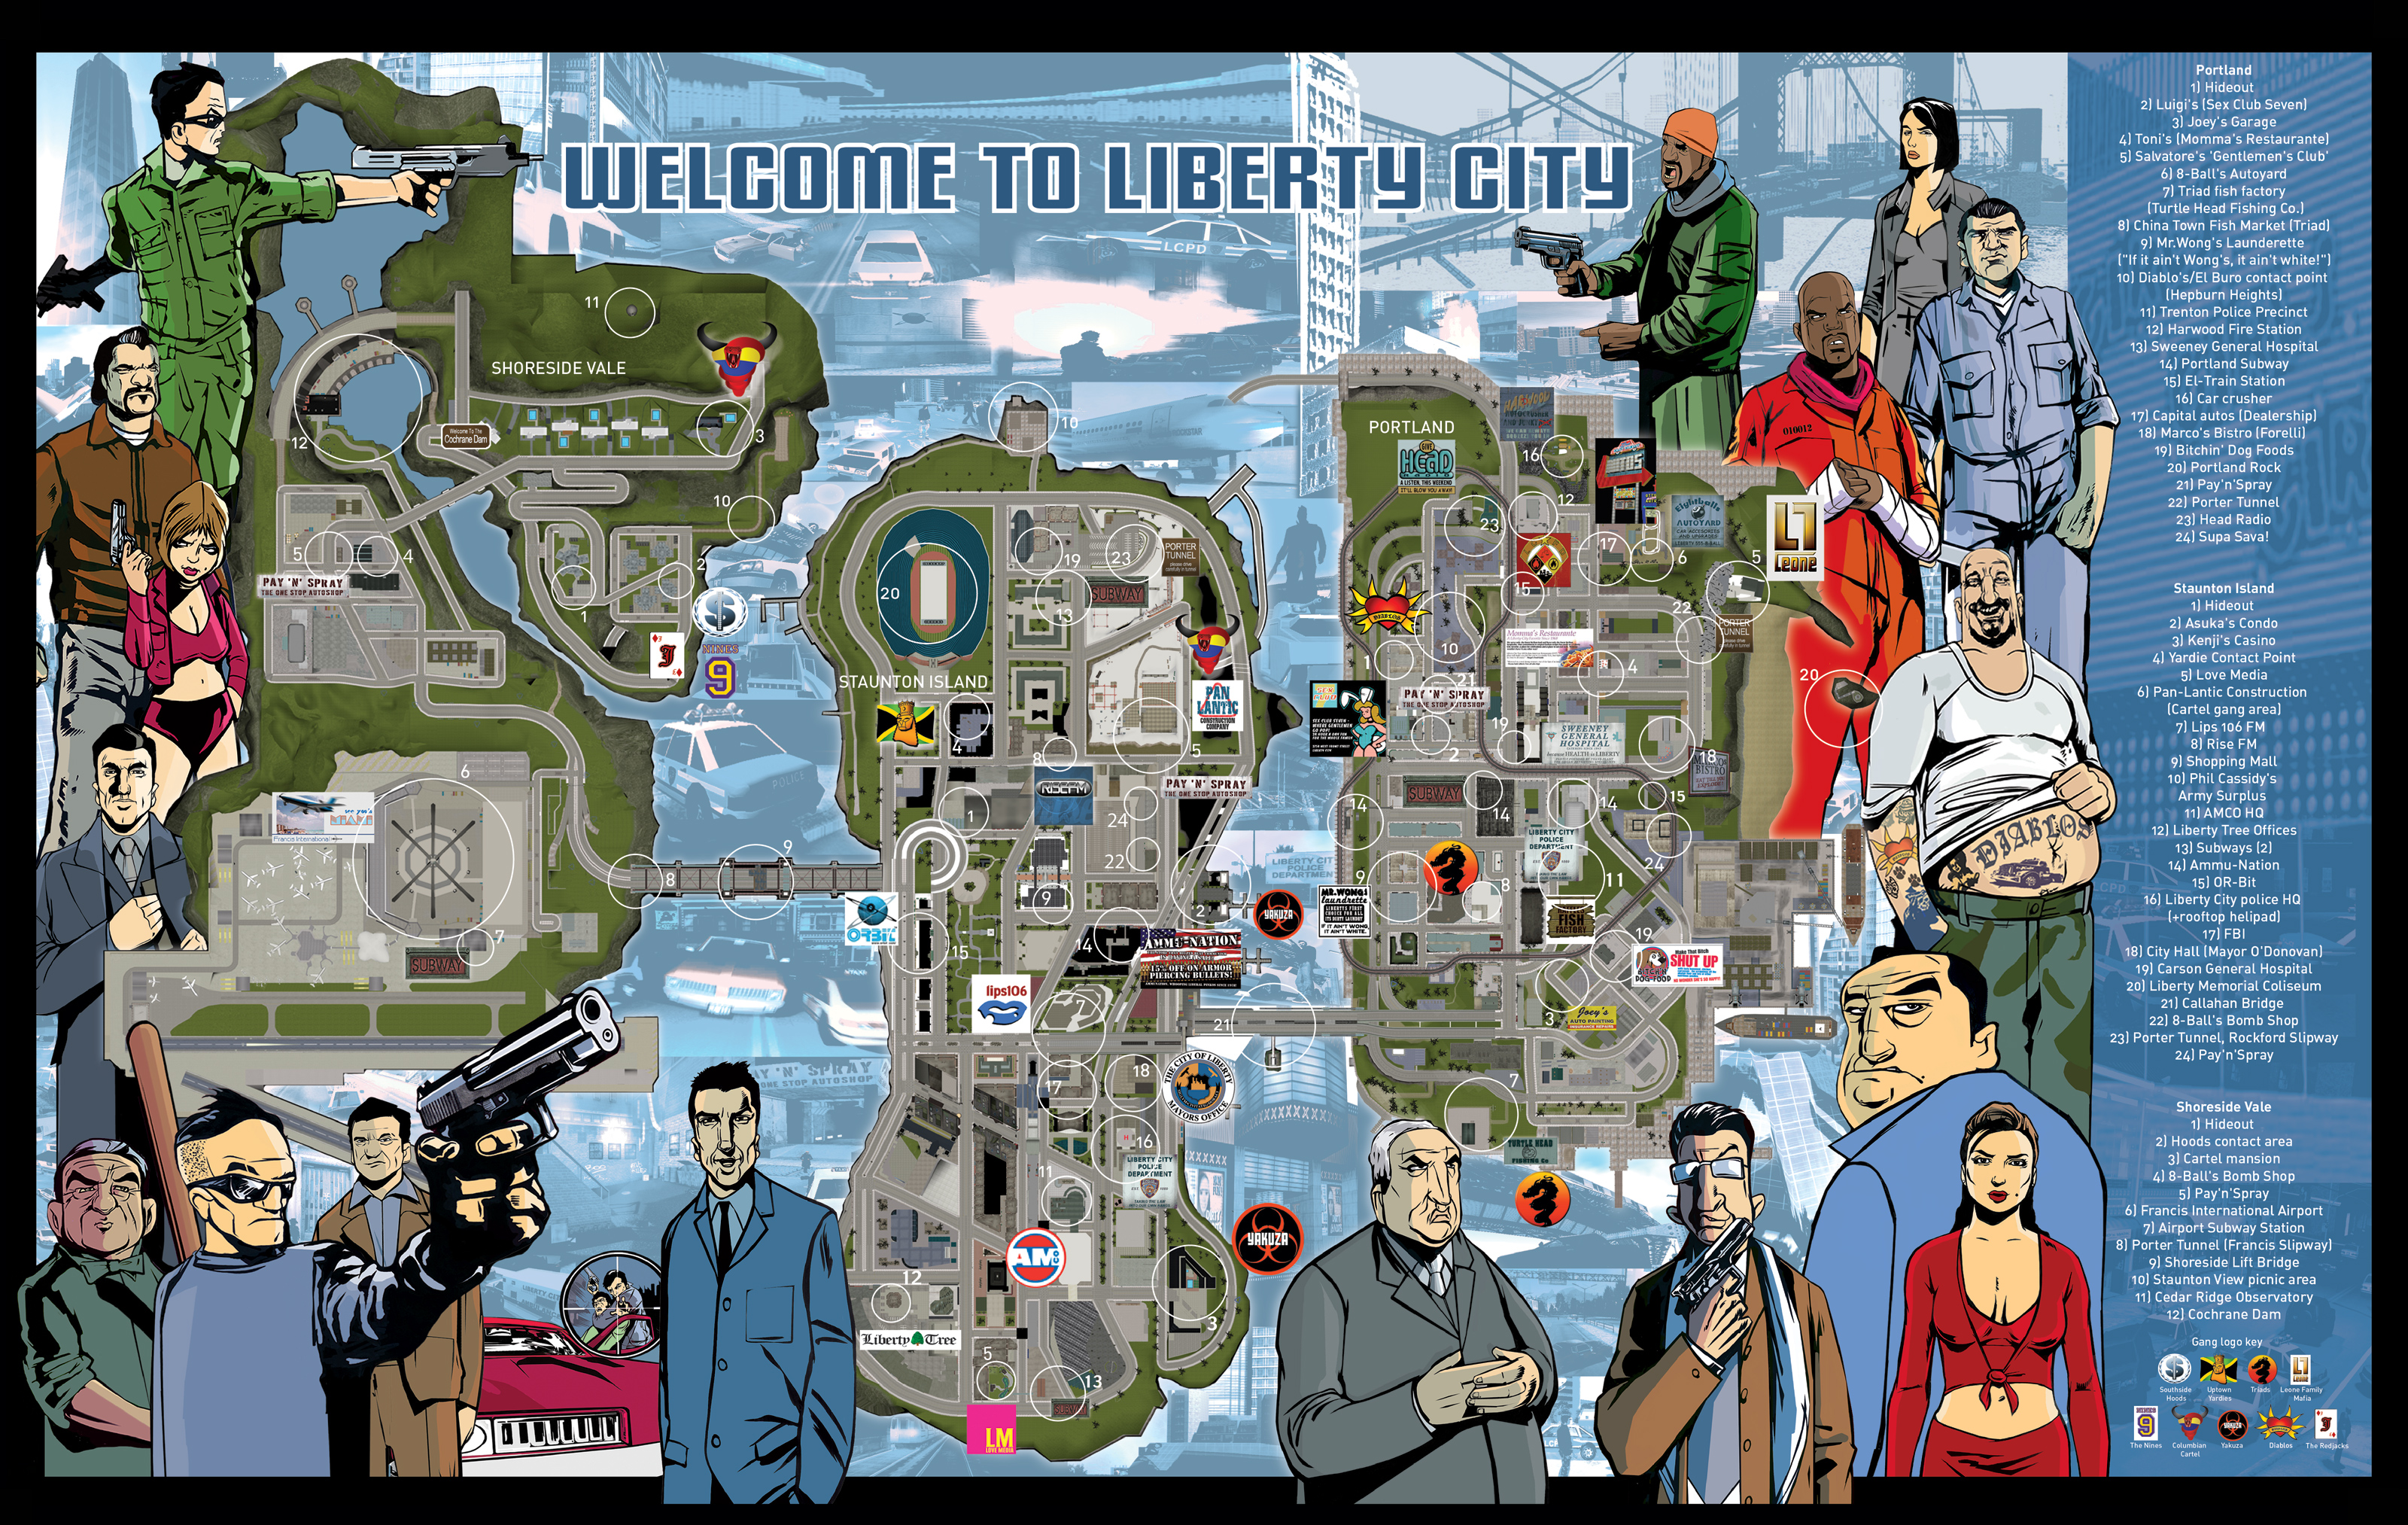 whole map of gta 4